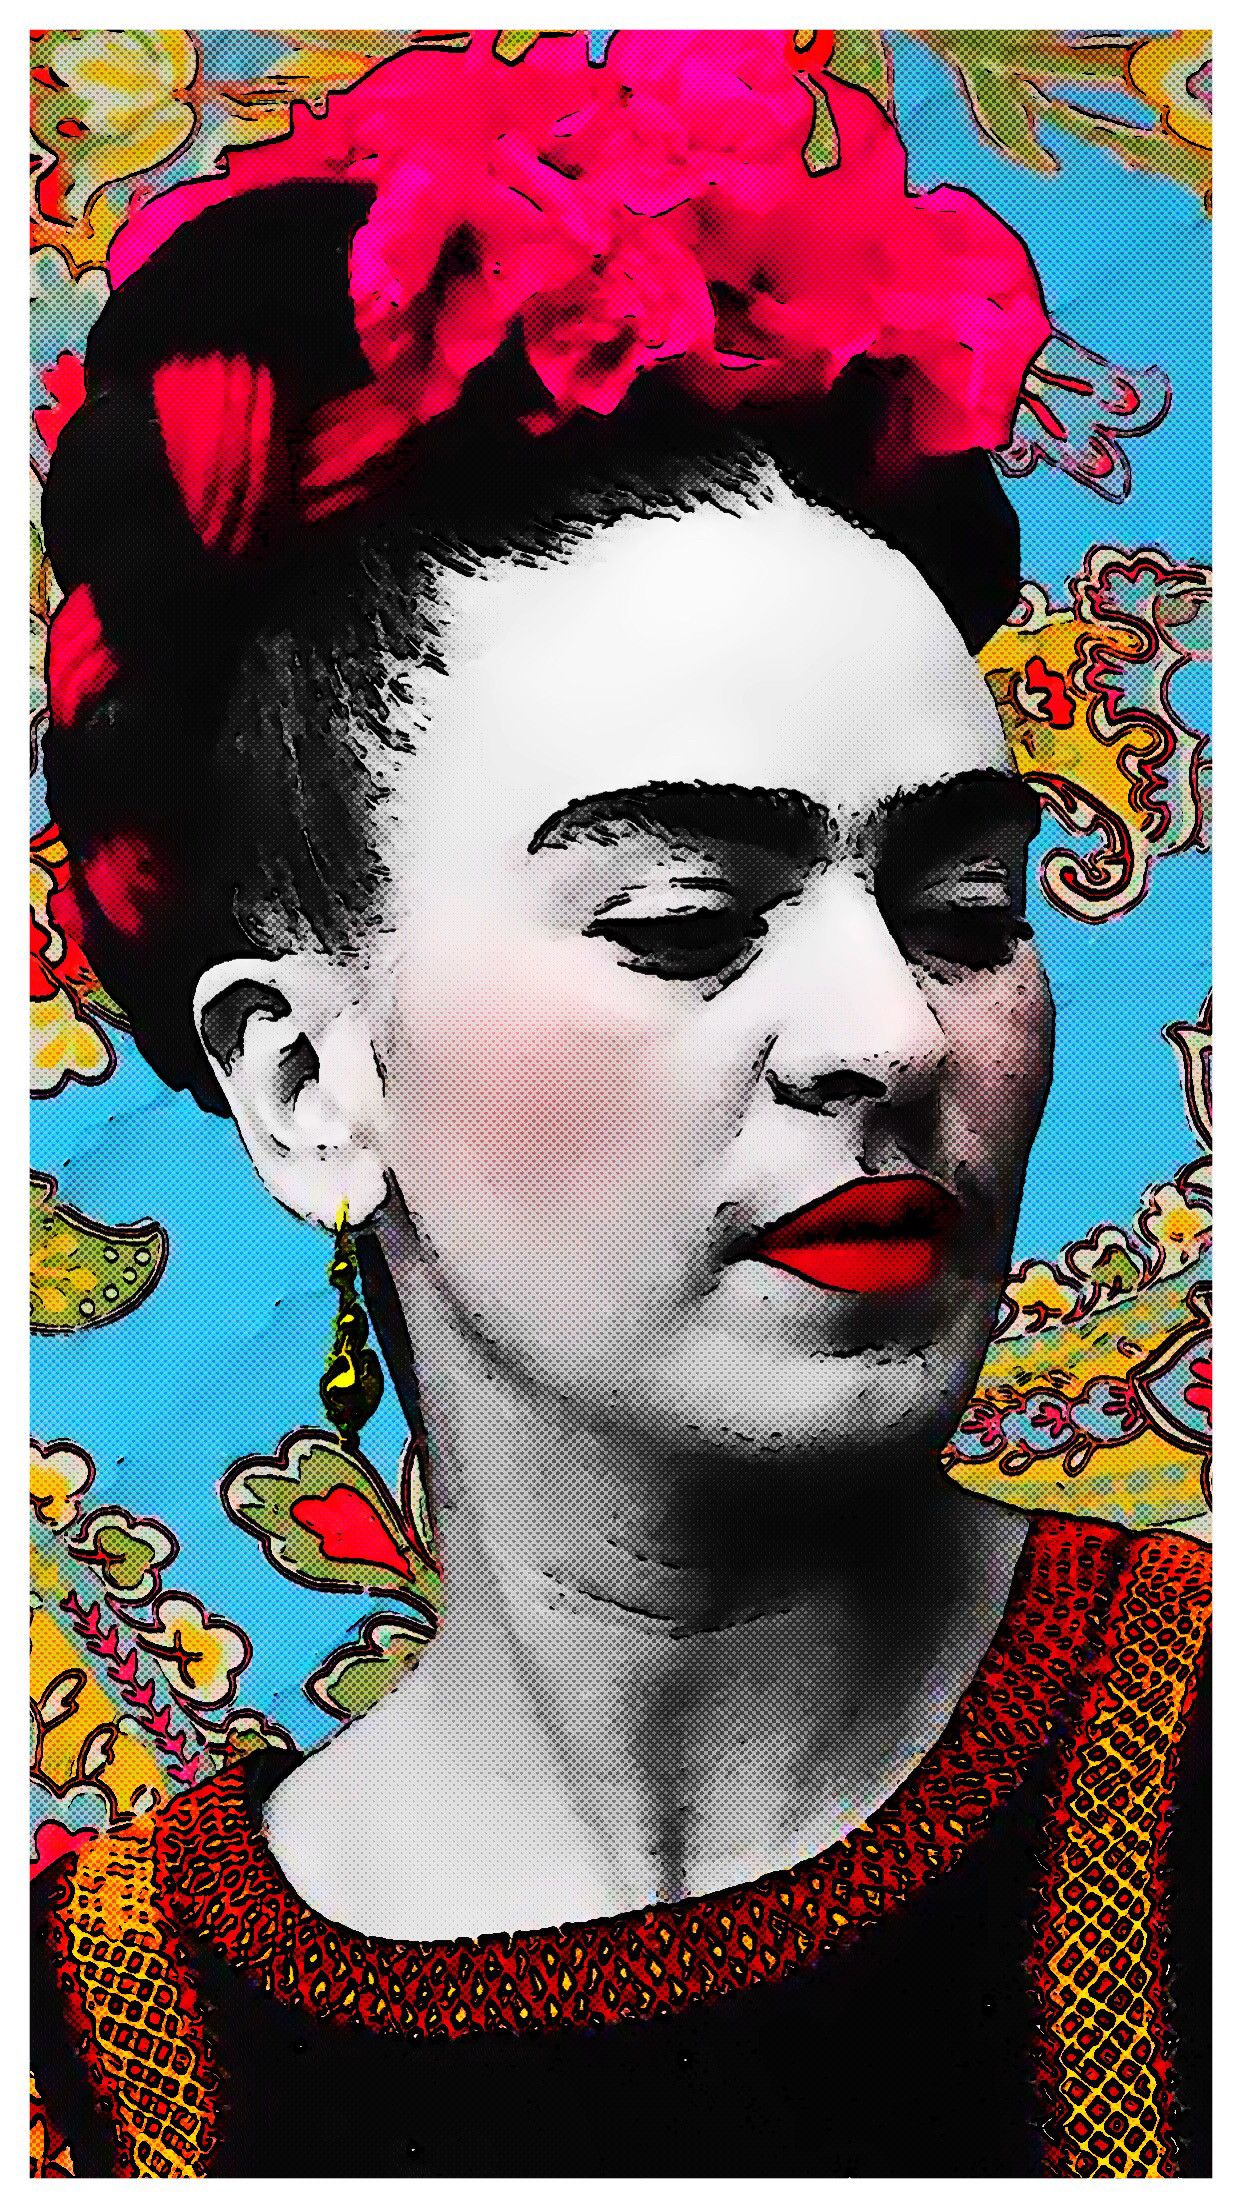 A portrait of Frida Kahlo with a blue background and flowers. - Frida Kahlo